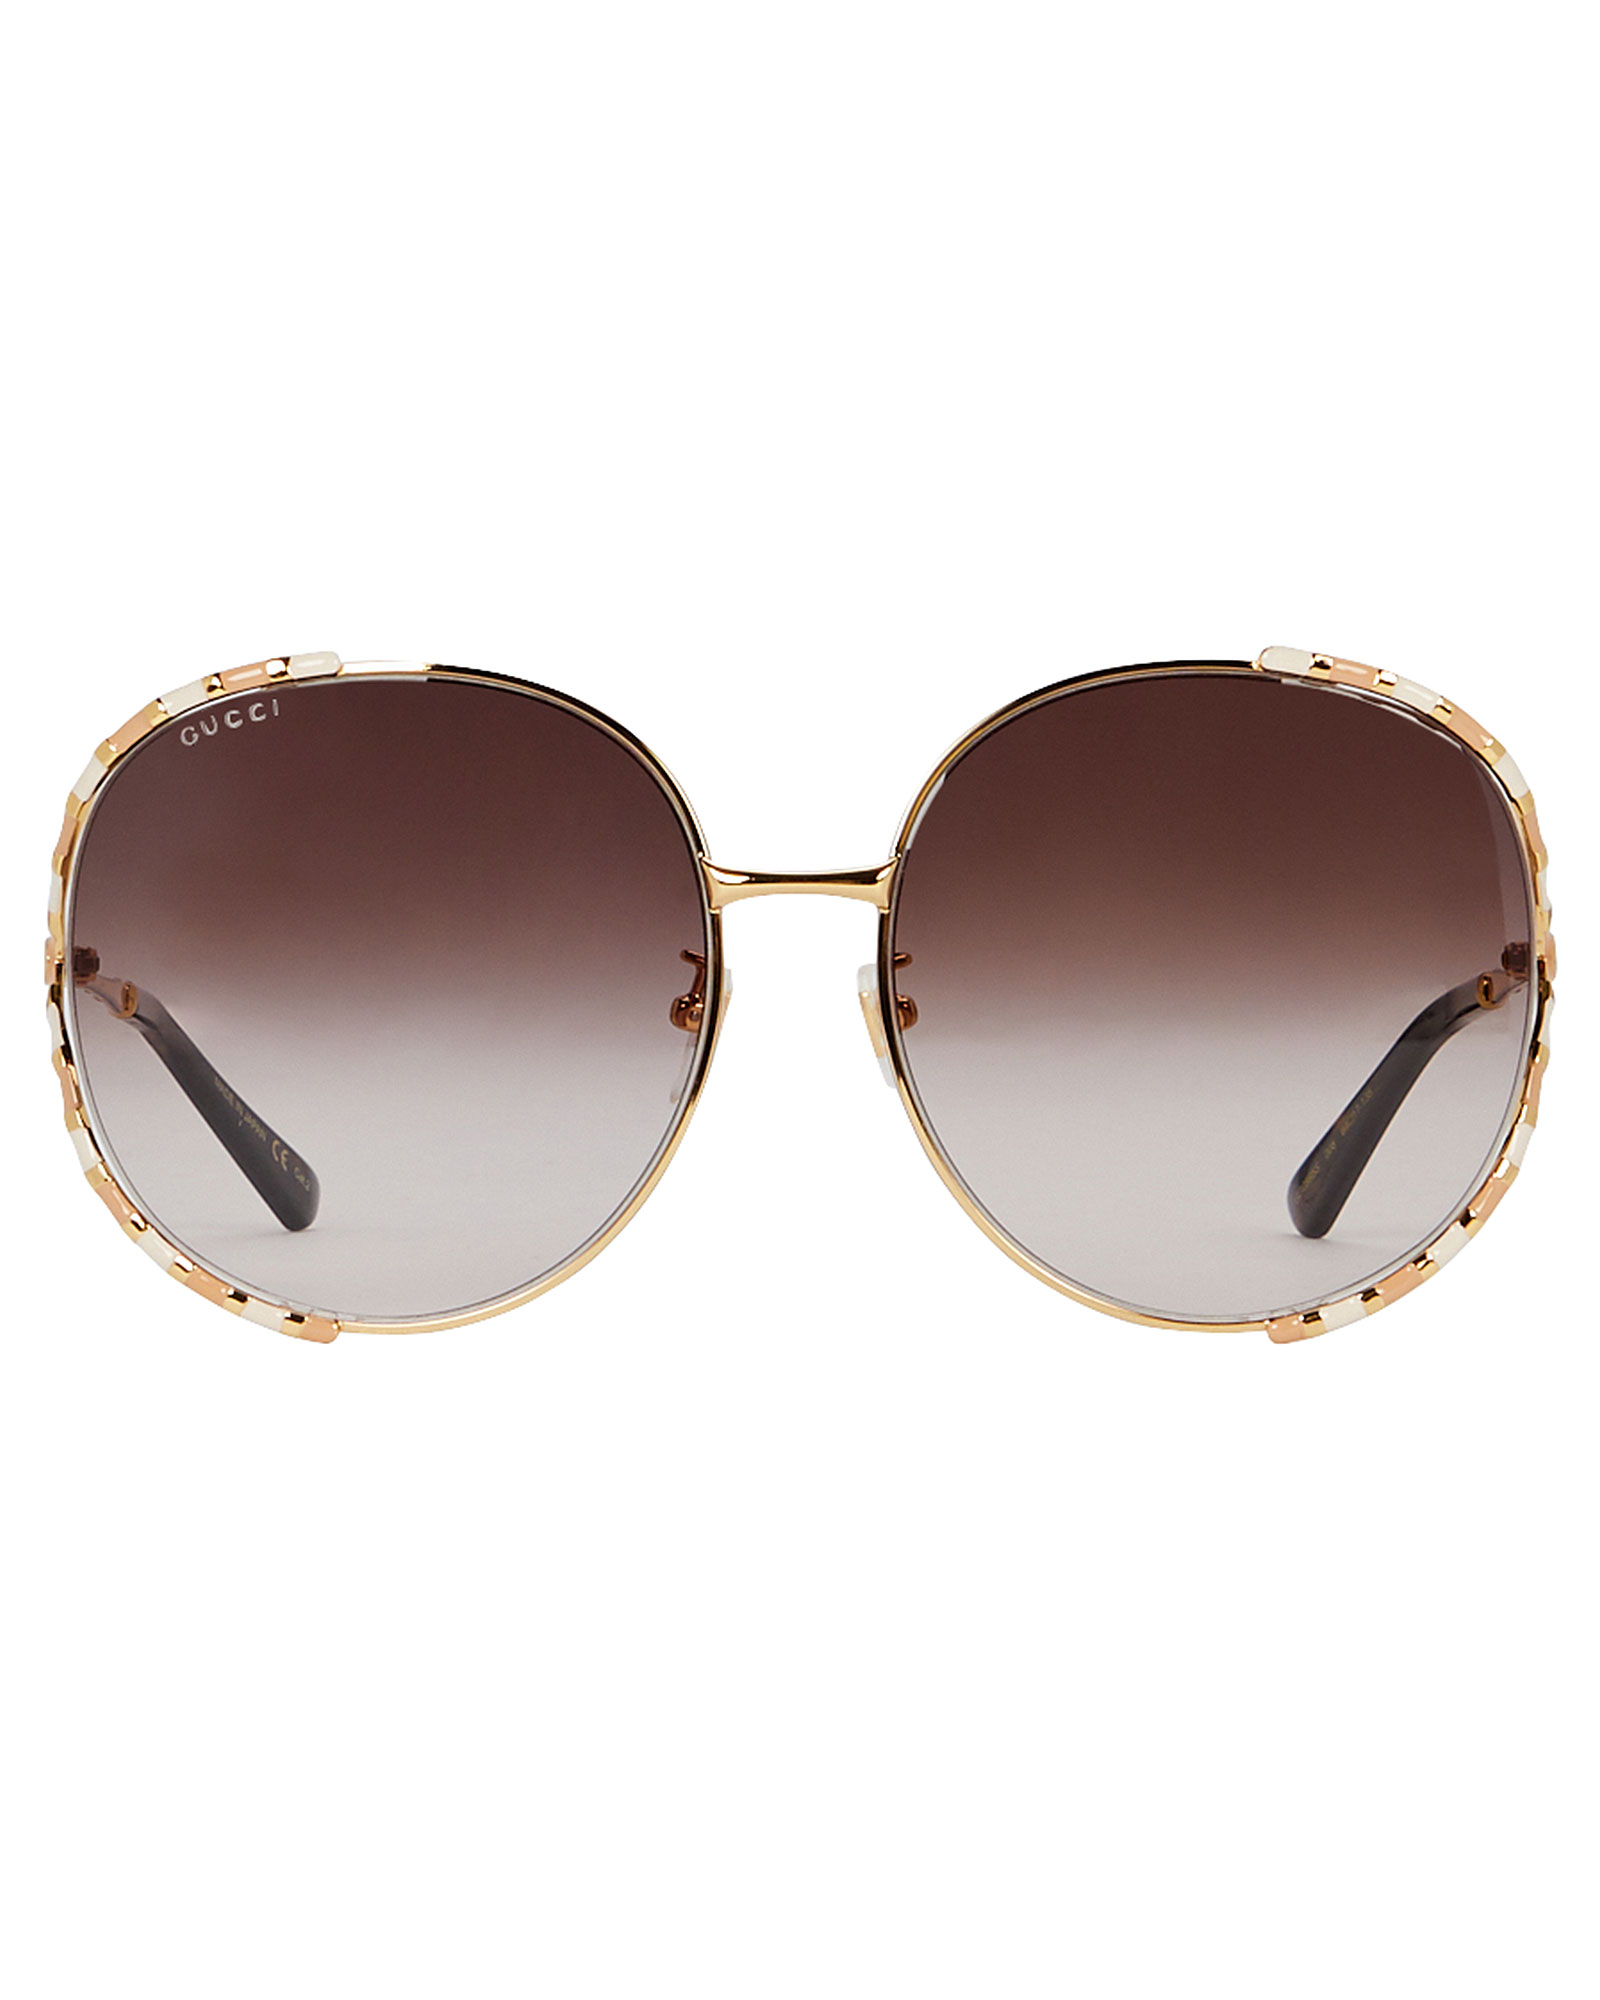 Gucci Oversized Rounded Sunglasses | ModeSens